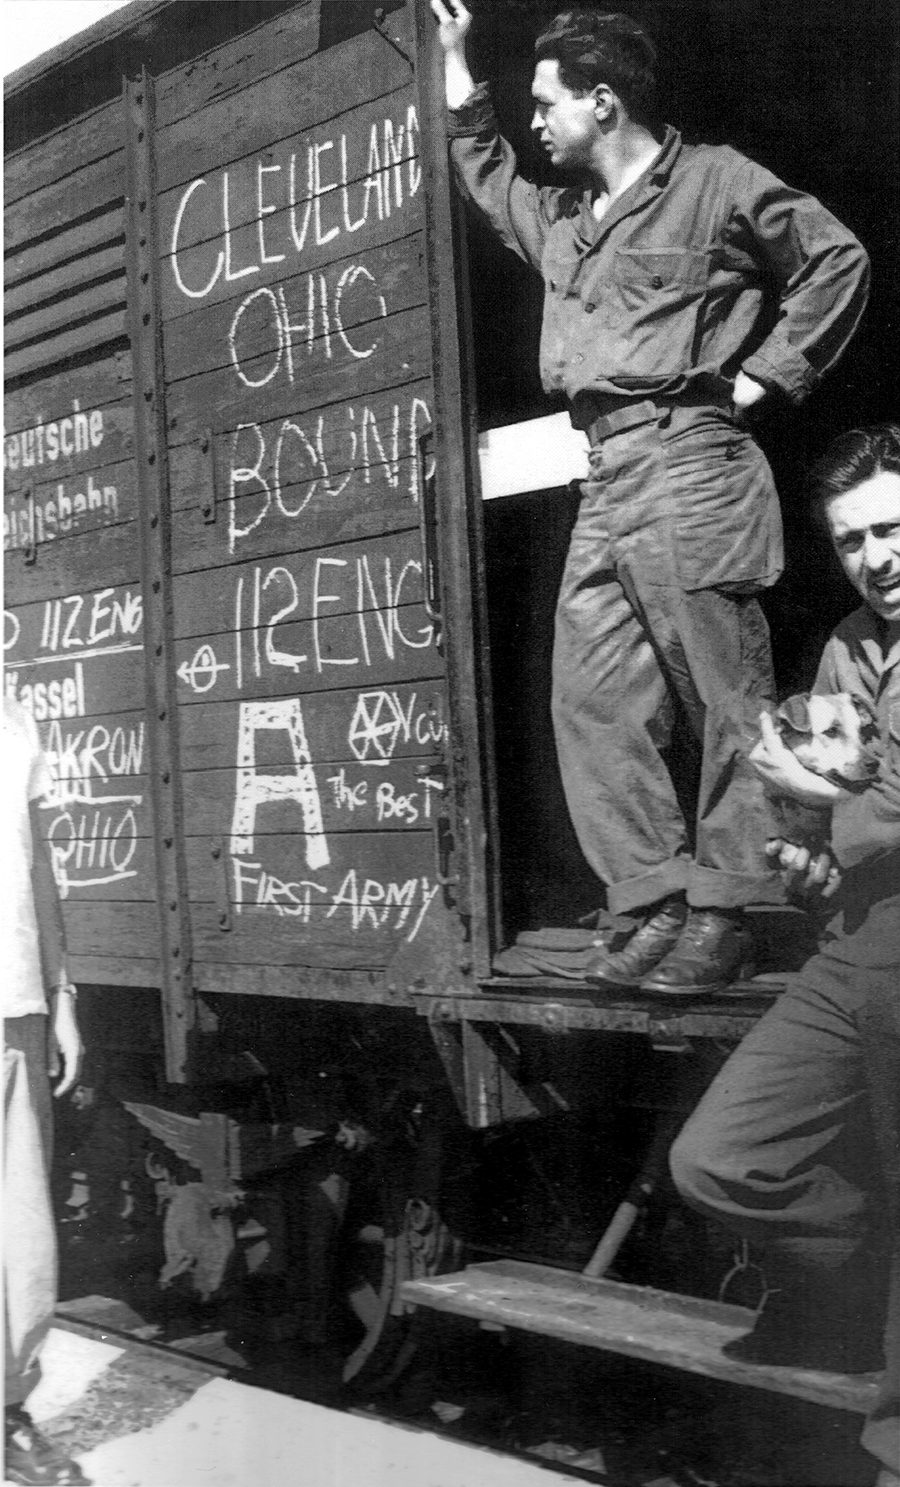 A Soldier stands in the door of a rail car marked 'Cleveland Ohio Bound'